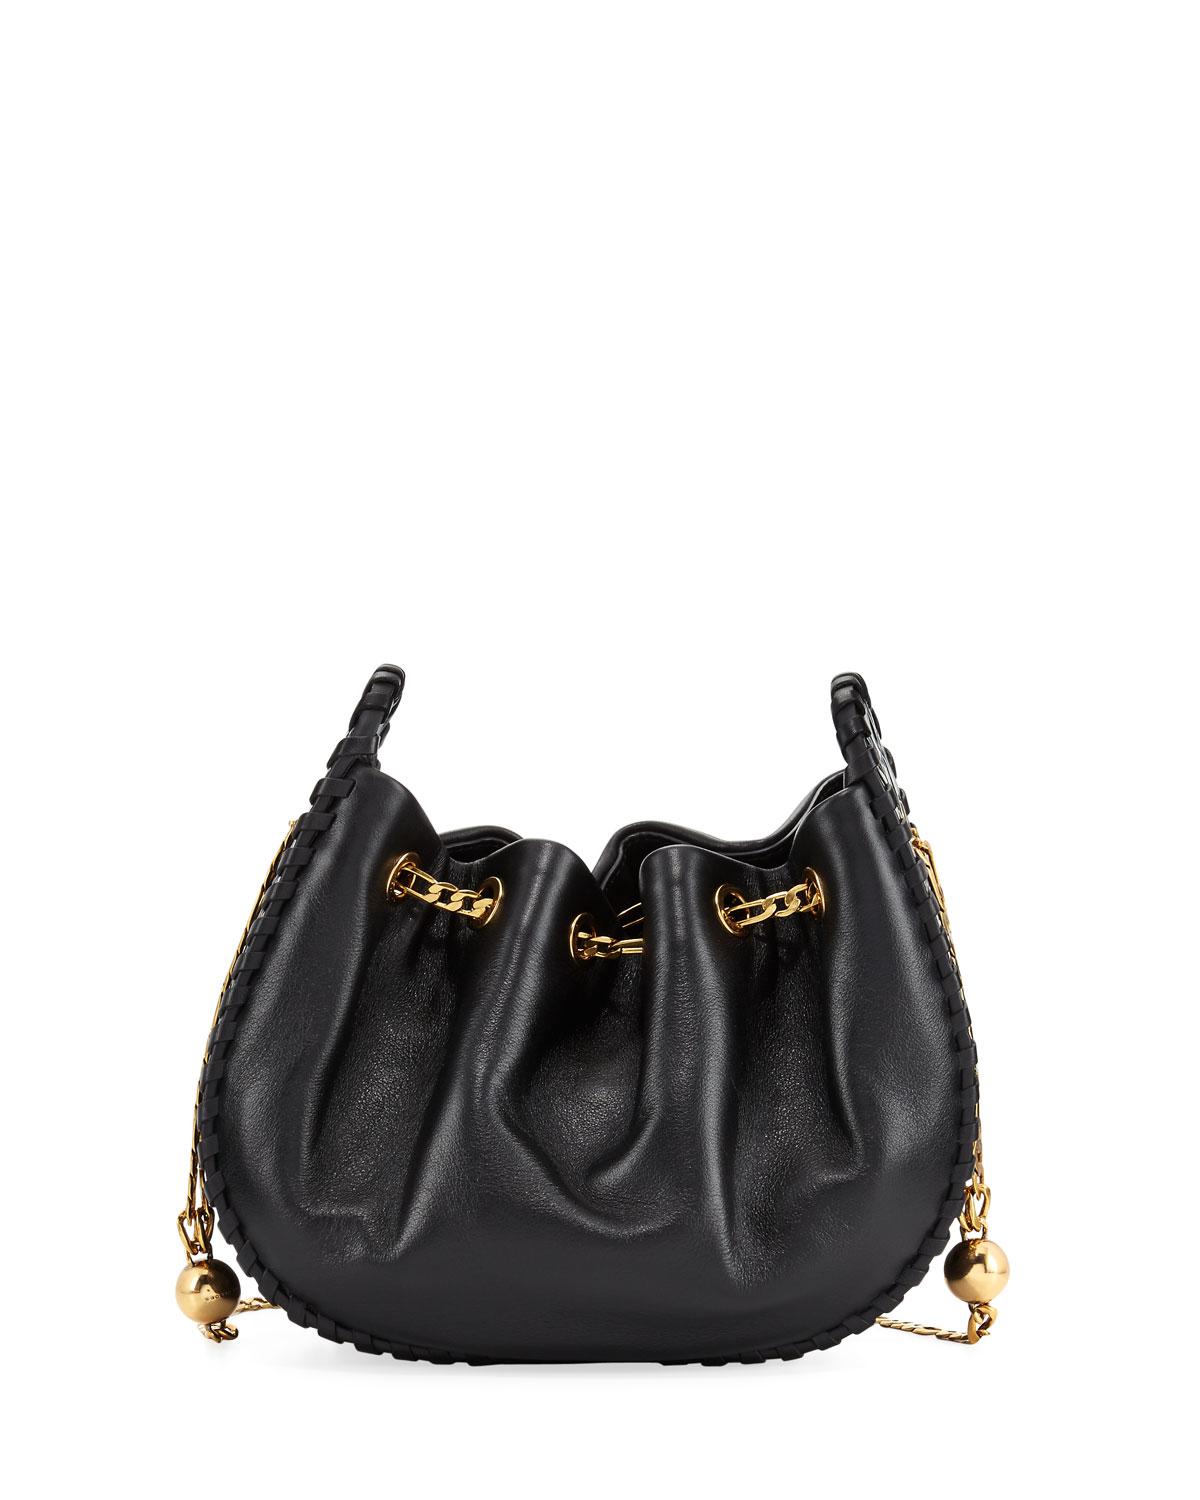 Marc Jacobs Sway Leather Bucket Crossbody Bag in Black - Lyst